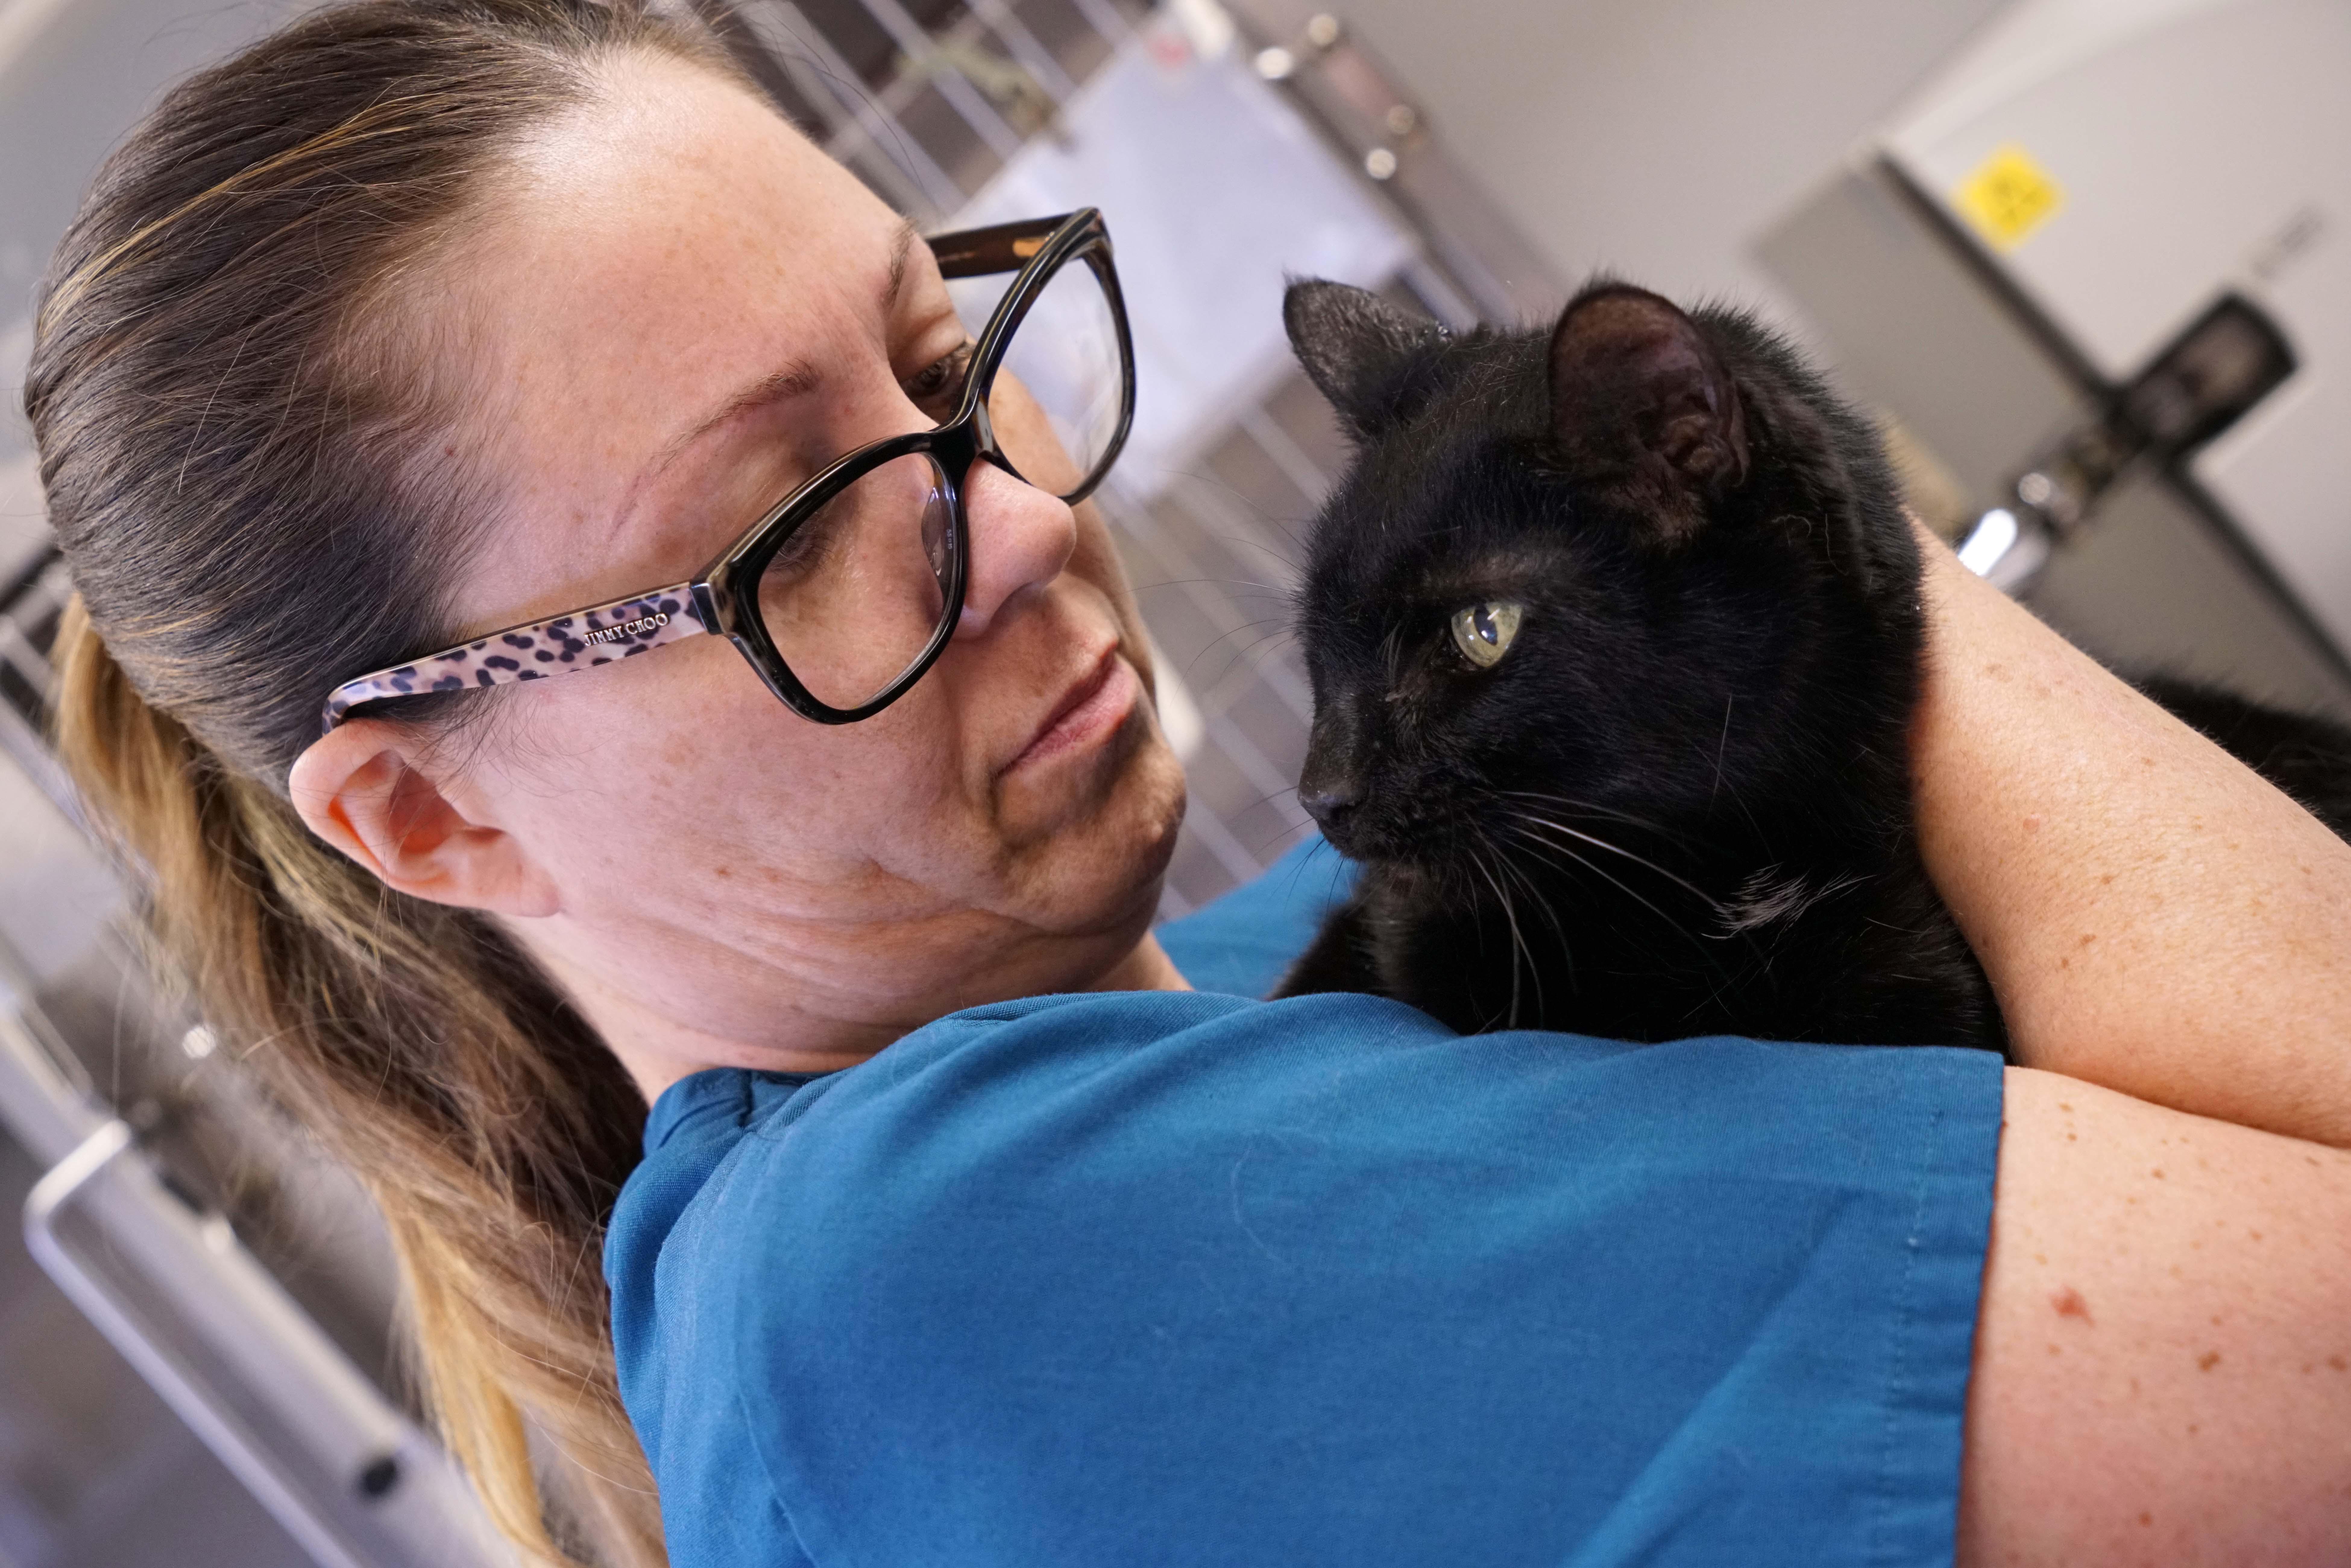 One of our veterinary technicians cuddles one of our sweet patients. At Family Pet Clinic we do everything we can to make sure your sweet pets are happy and comfortable when they visit.